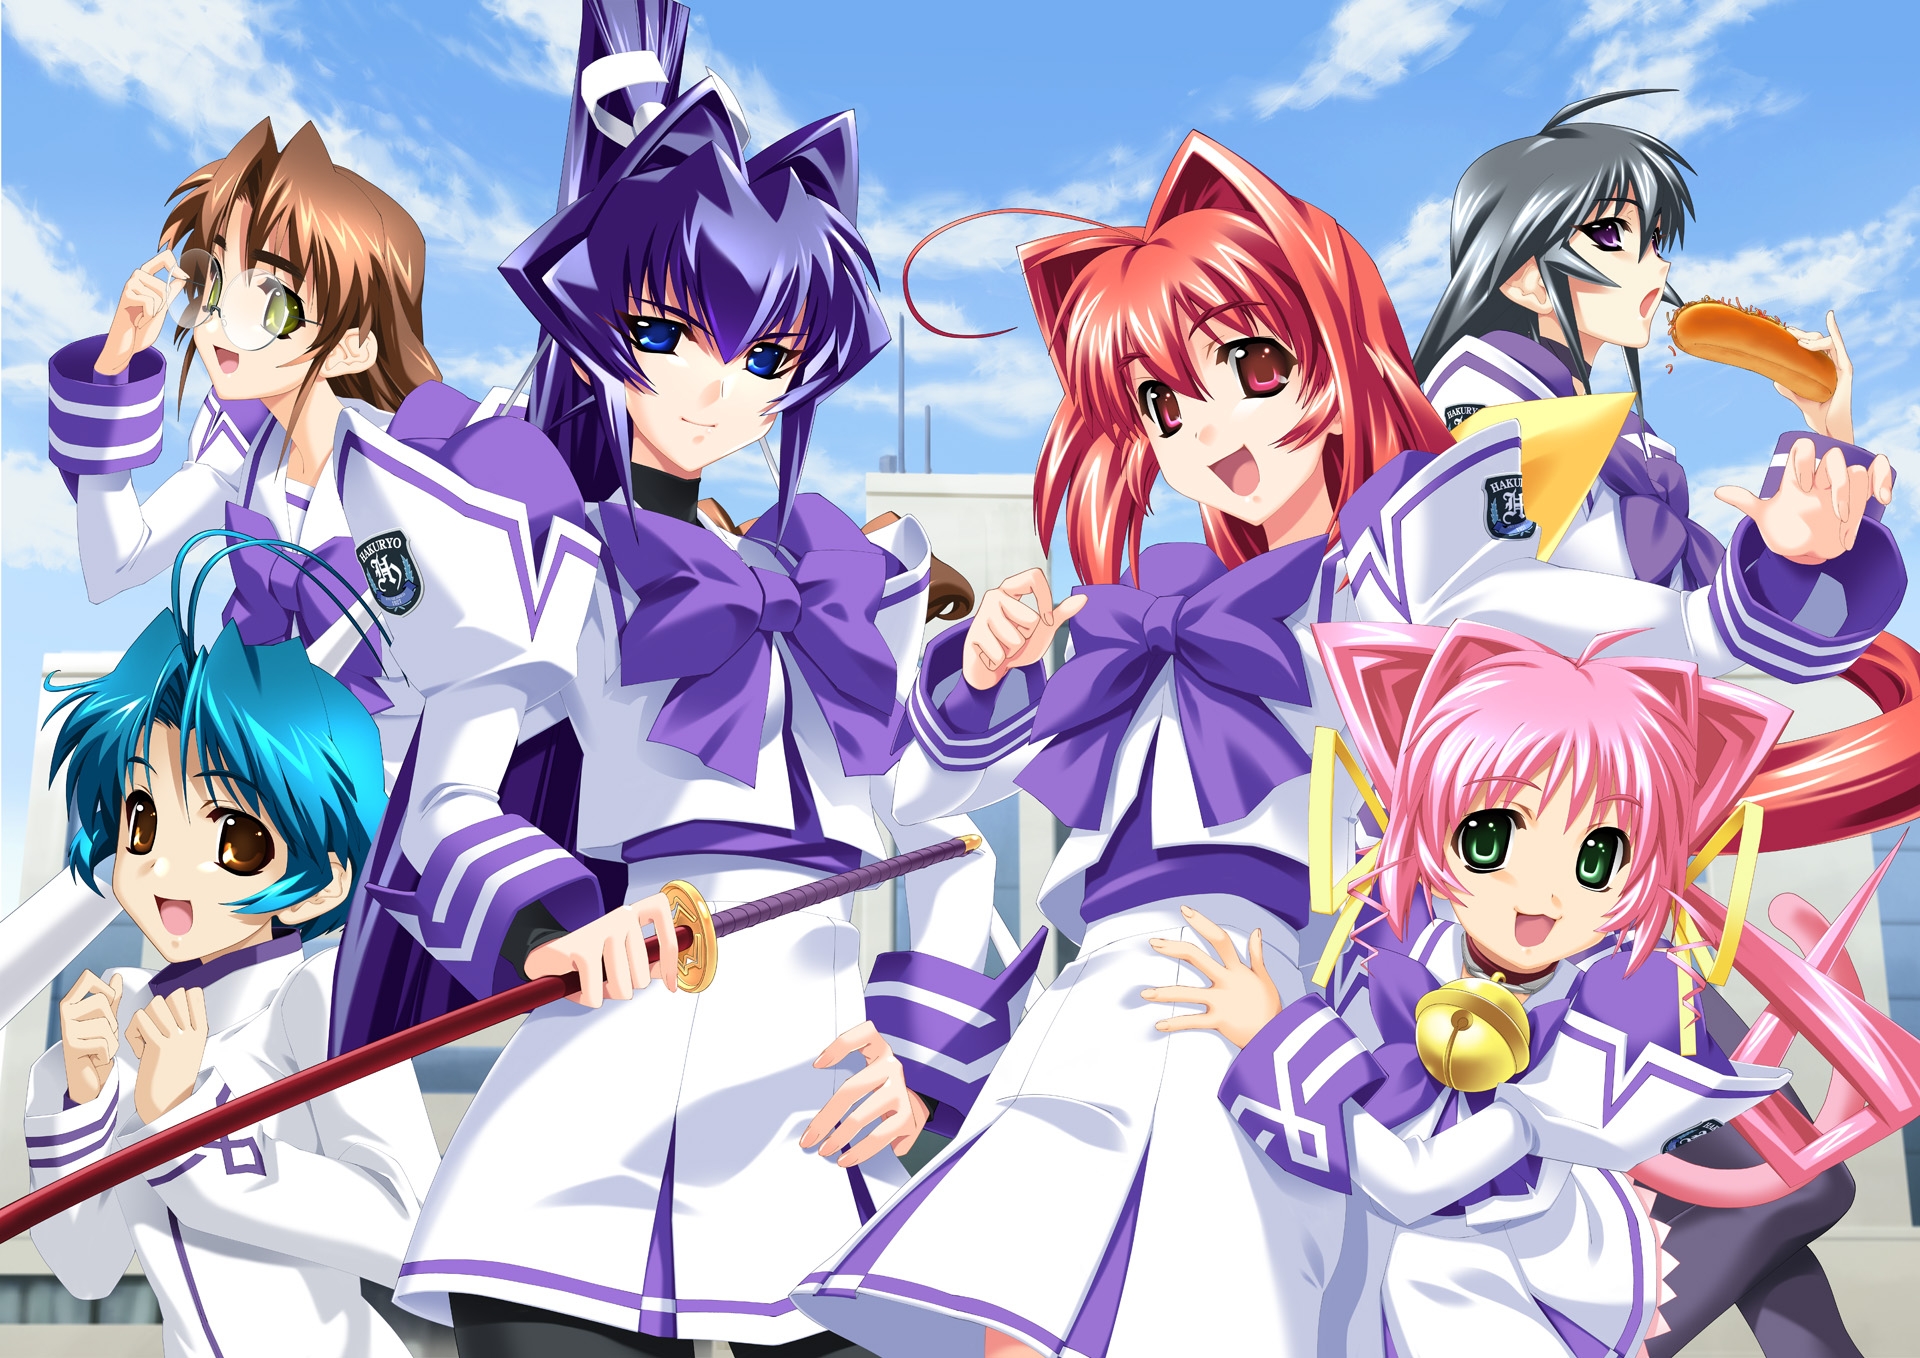 Muv-Luv Backgrounds, Compatible - PC, Mobile, Gadgets| 1920x1358 px